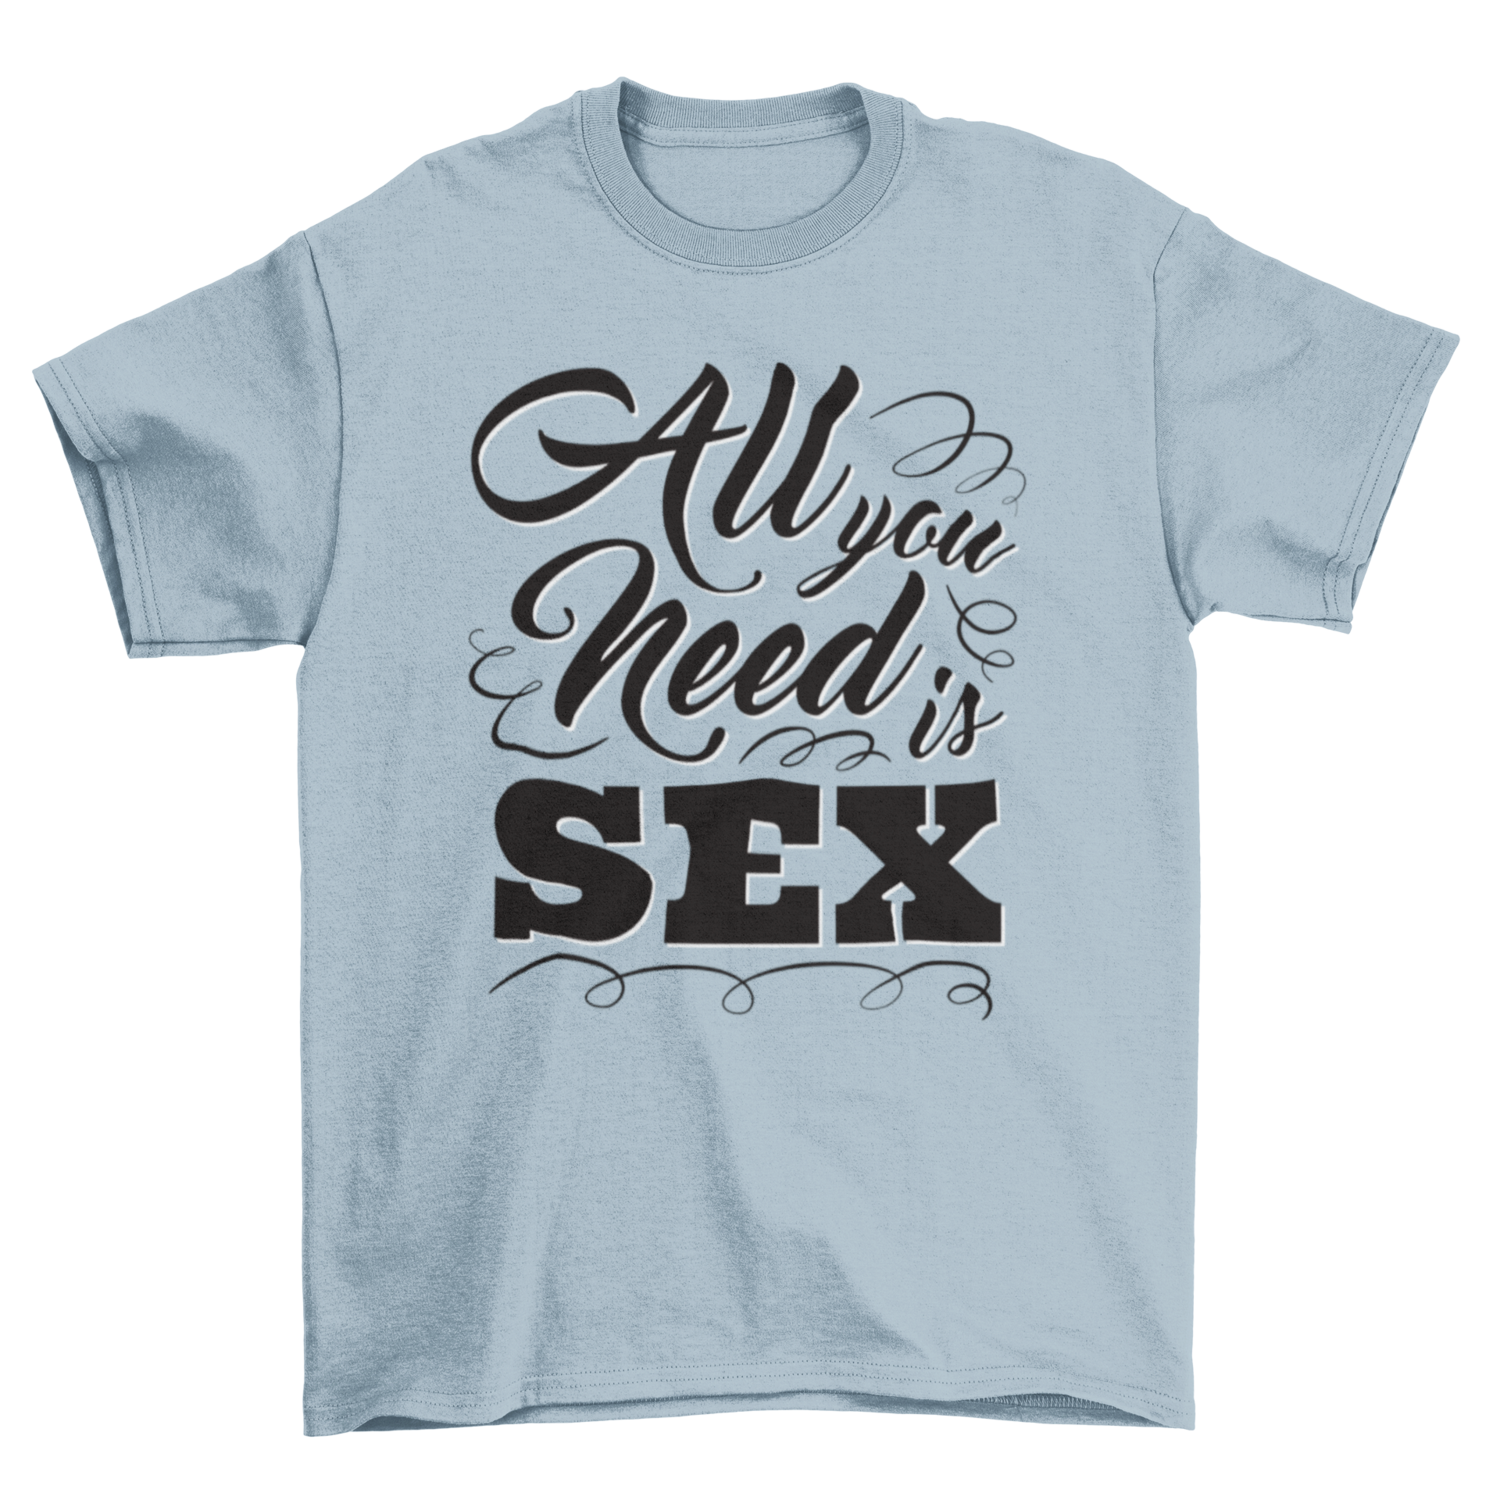 All you need is sex tshirt